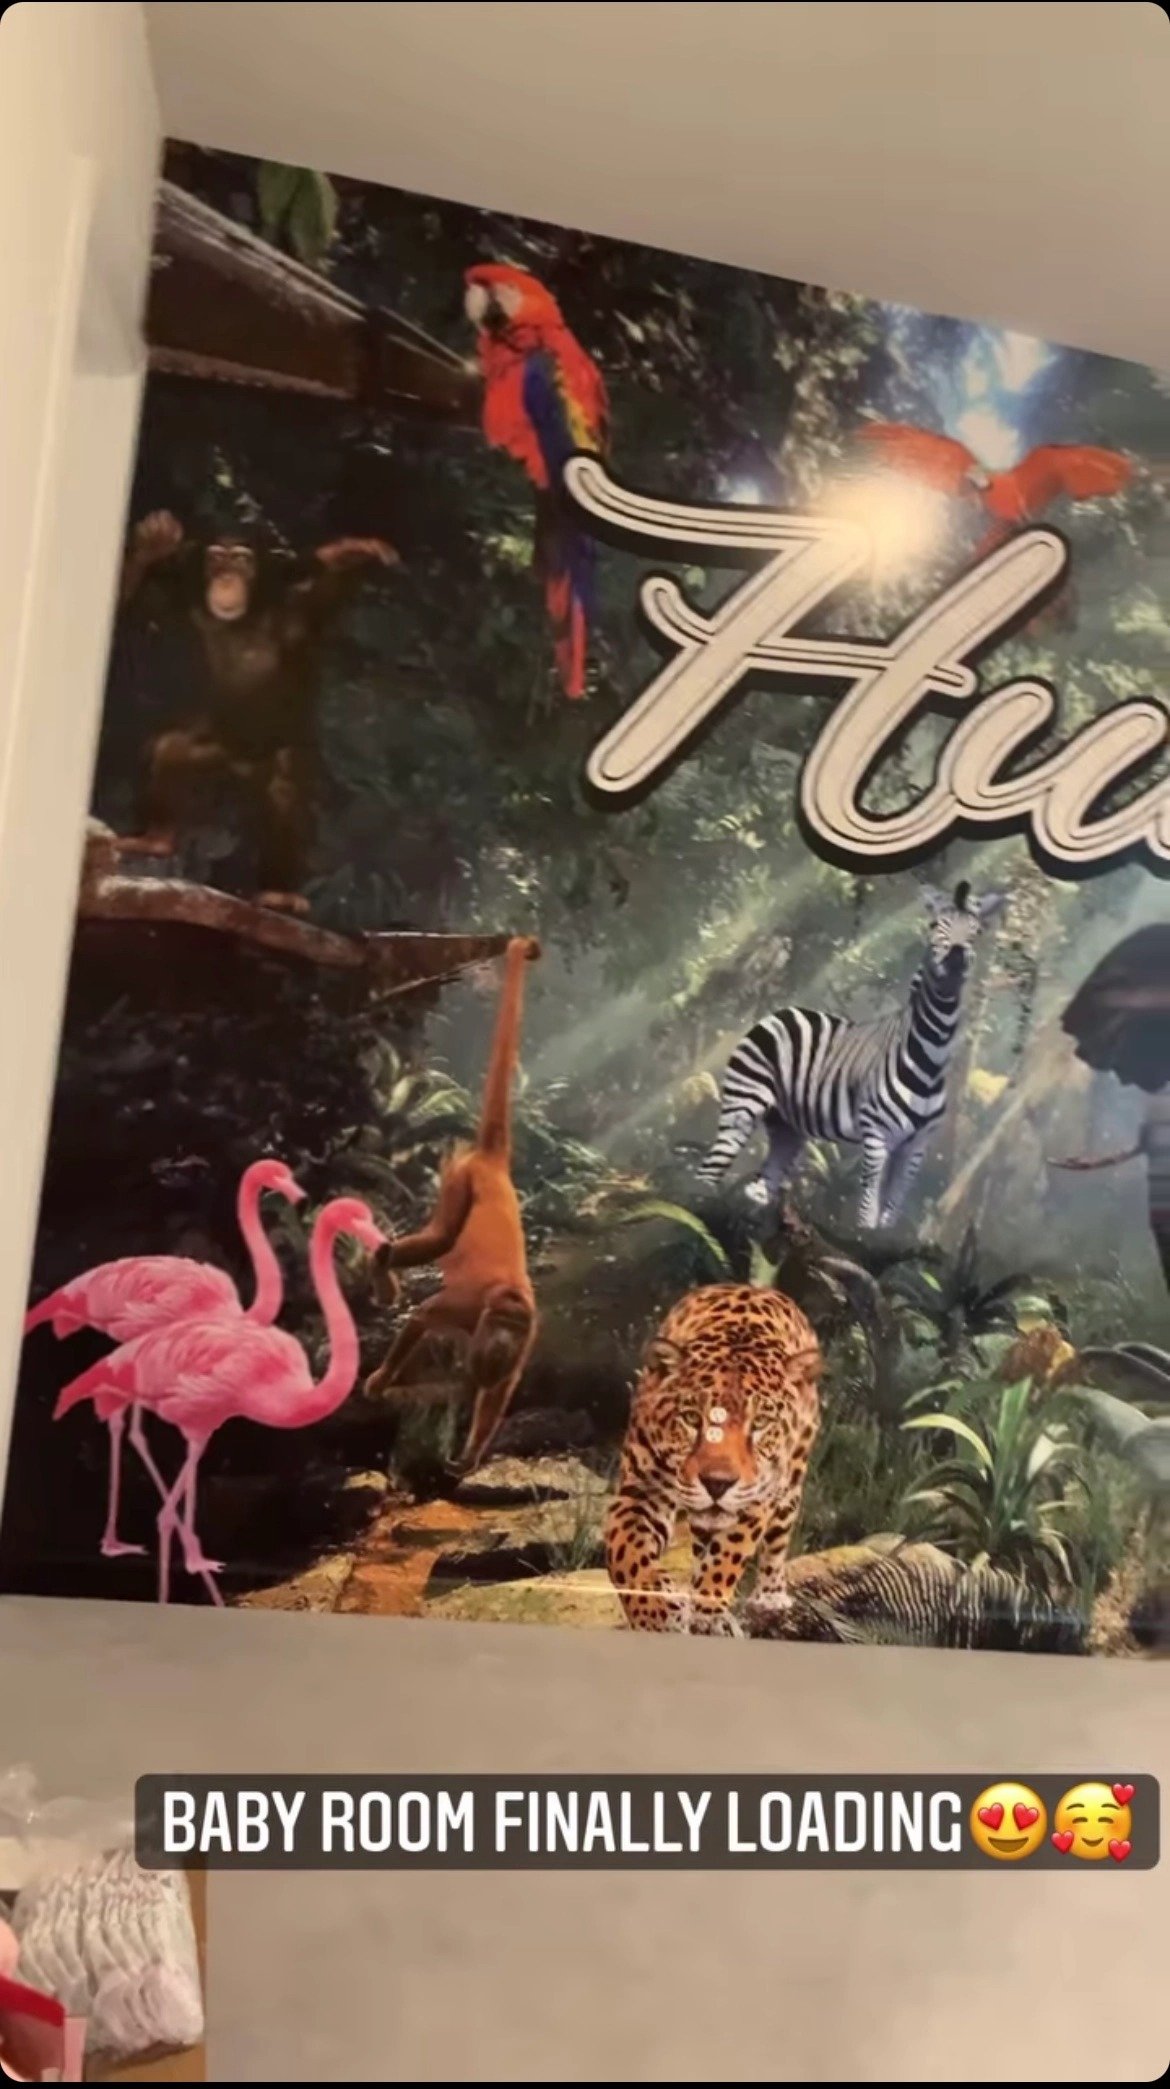  Zonnique Pullins showing fans her daughter's jungle-themed nursery room on Instagram Story. | Photo: instagram.com/zonniquejailee